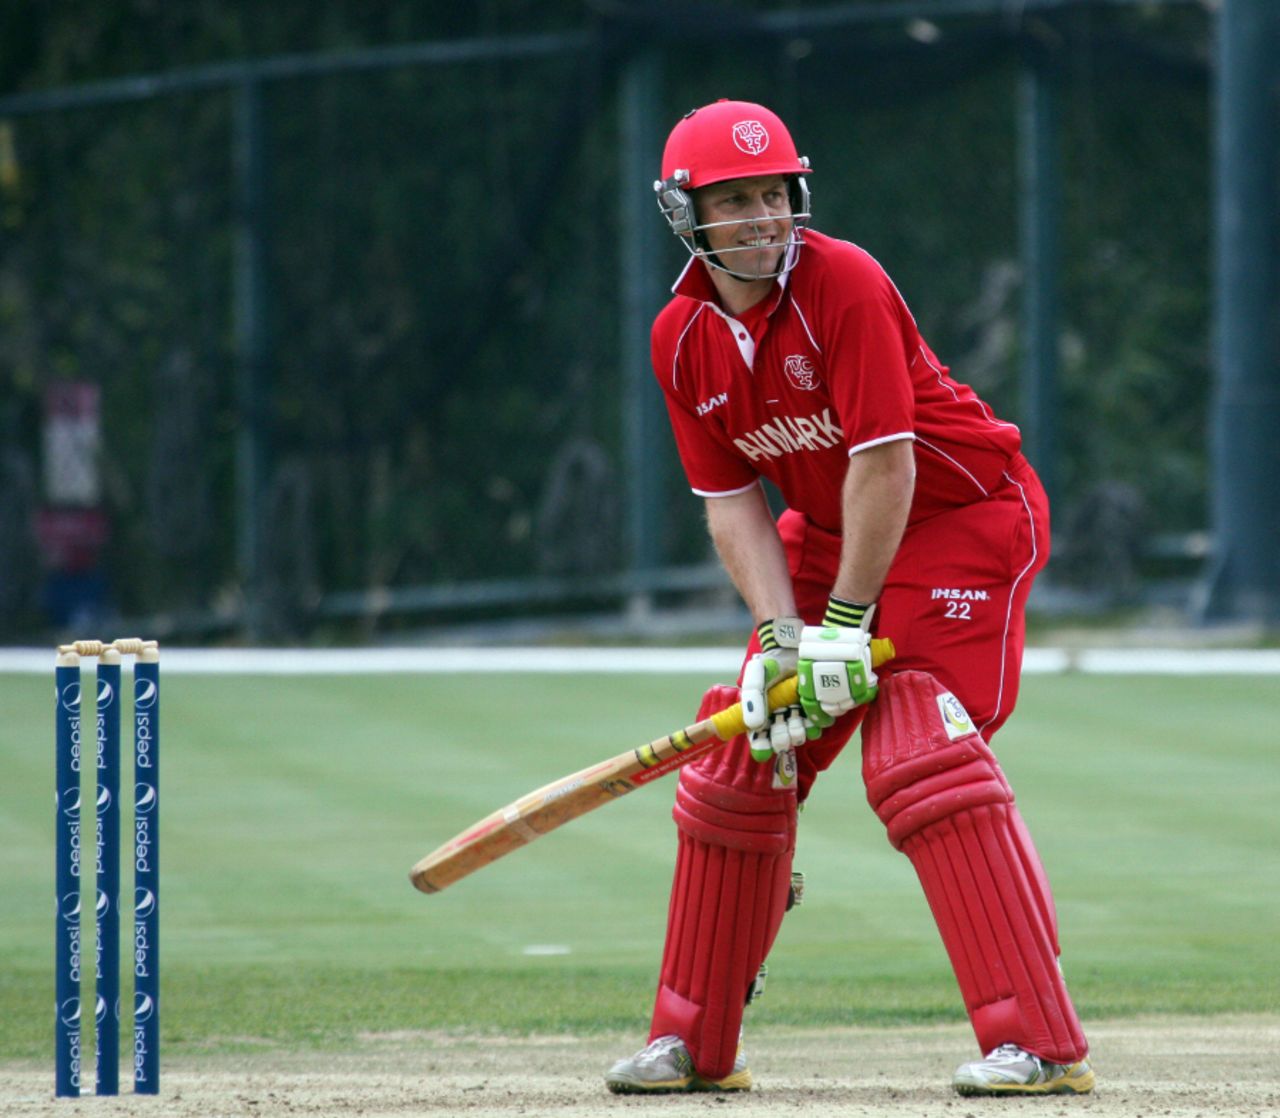 Carsten Pedersen in his batting stance, Denmark v Italy, WCL Division Three, Hong Kong Cricket Club, January 22, 2011